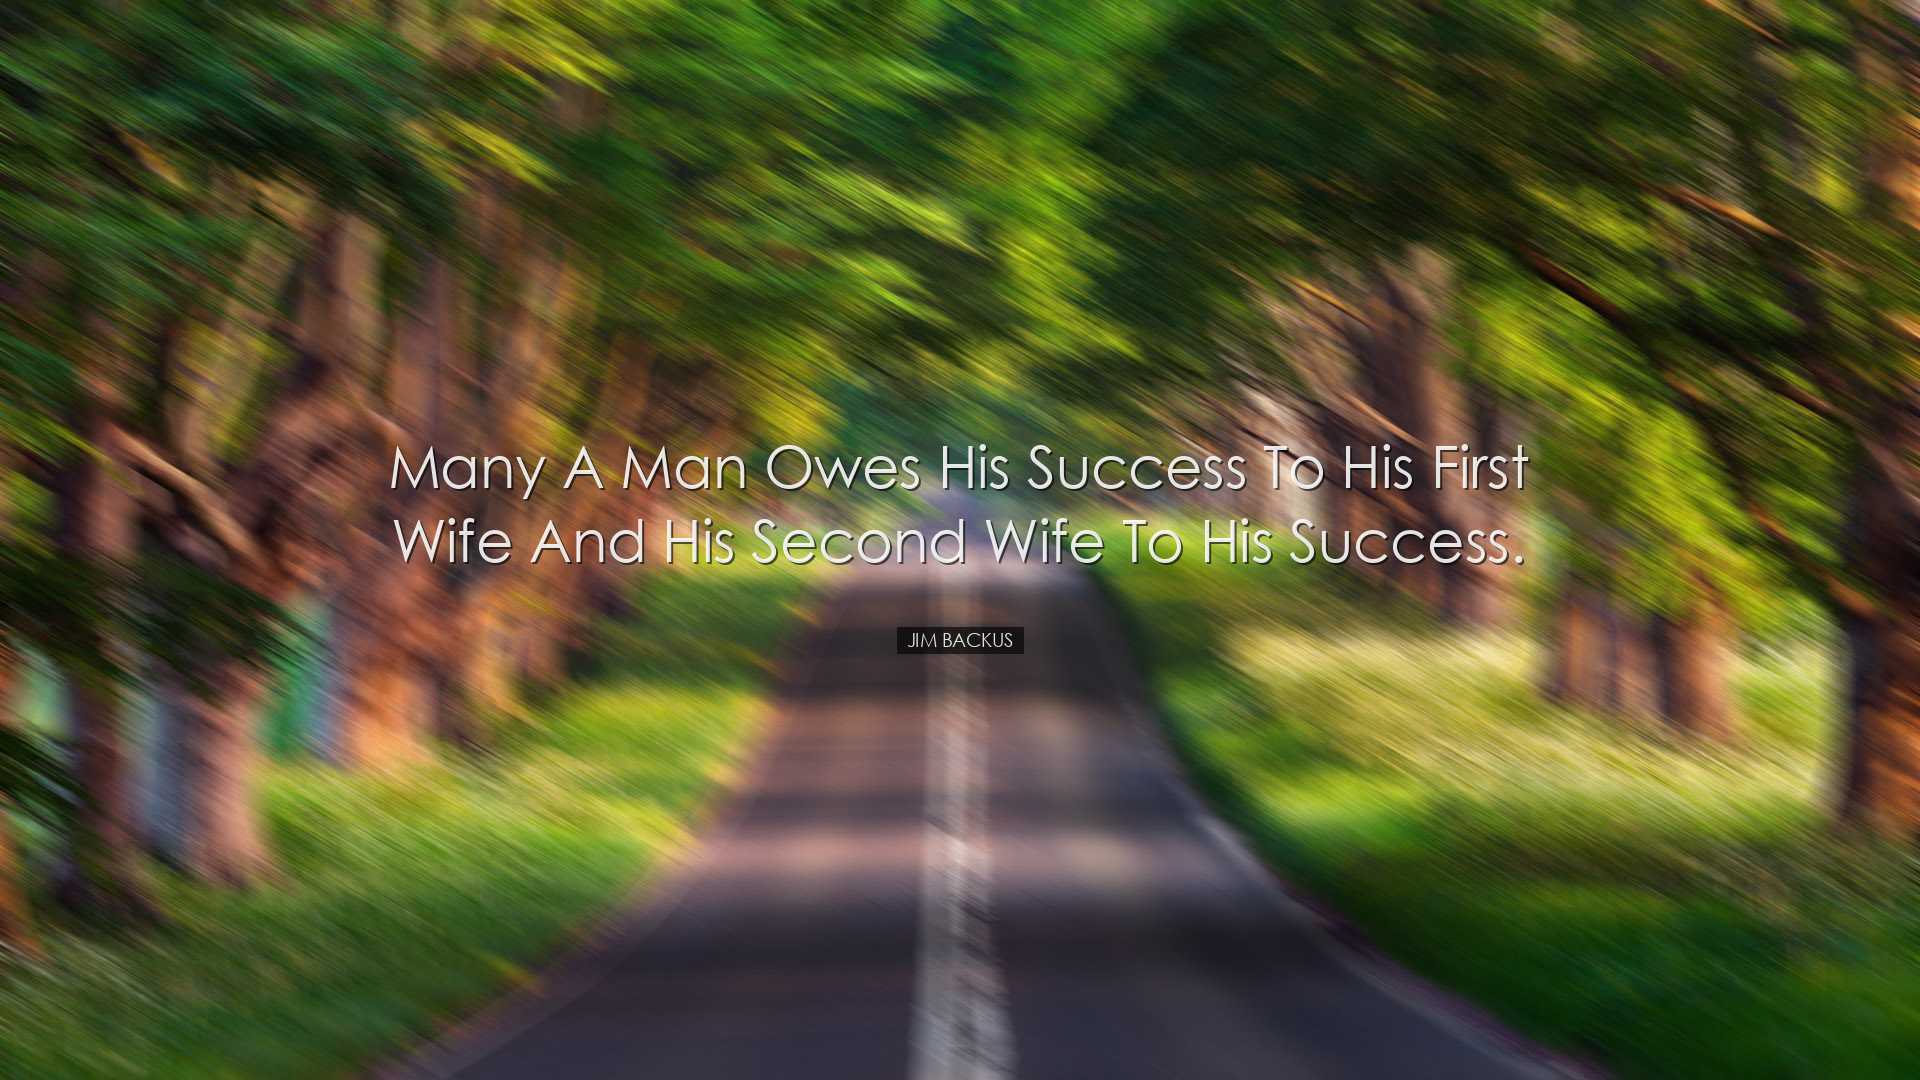 Many a man owes his success to his first wife and his second wife